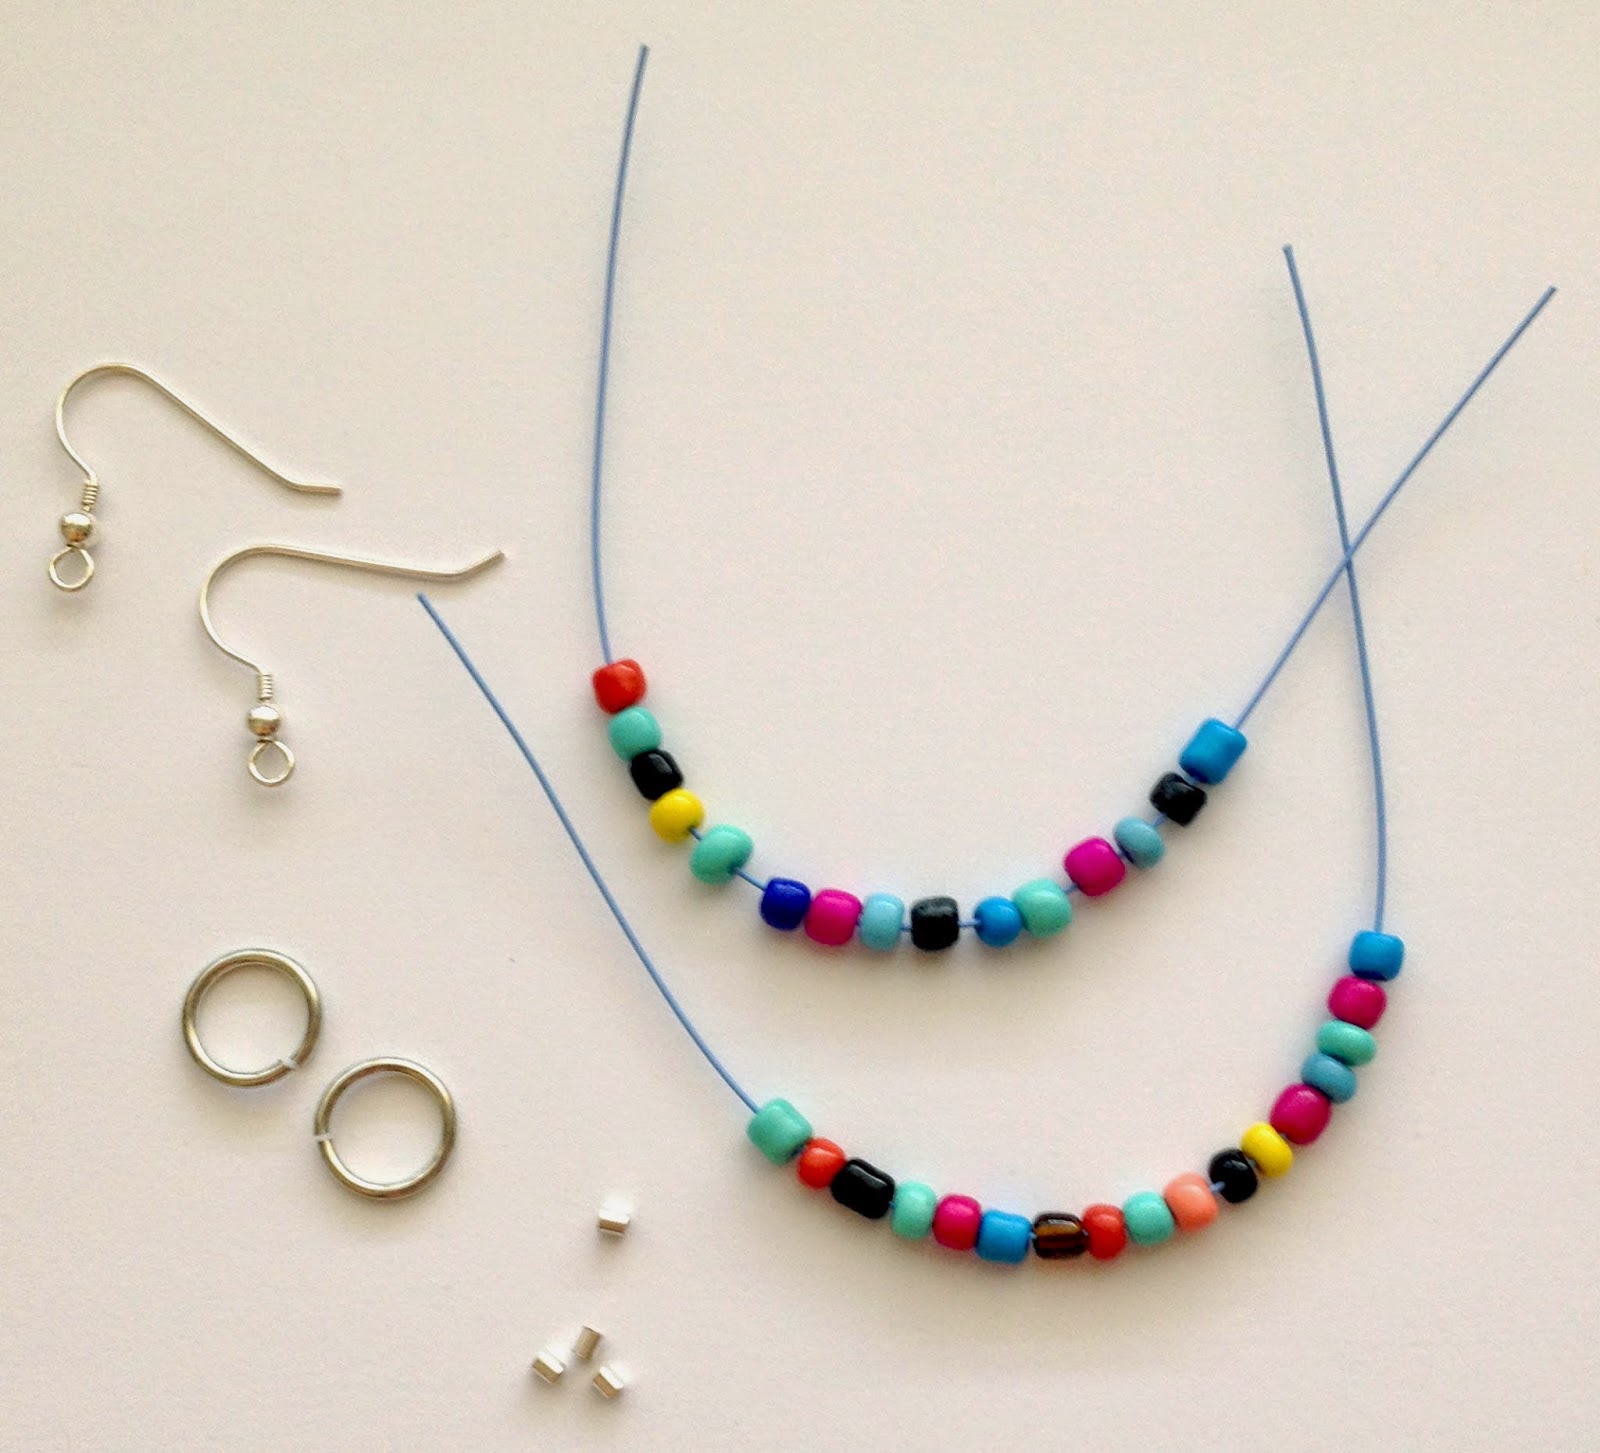 How to Make Beaded Wire Earrings - Easy Tutorial